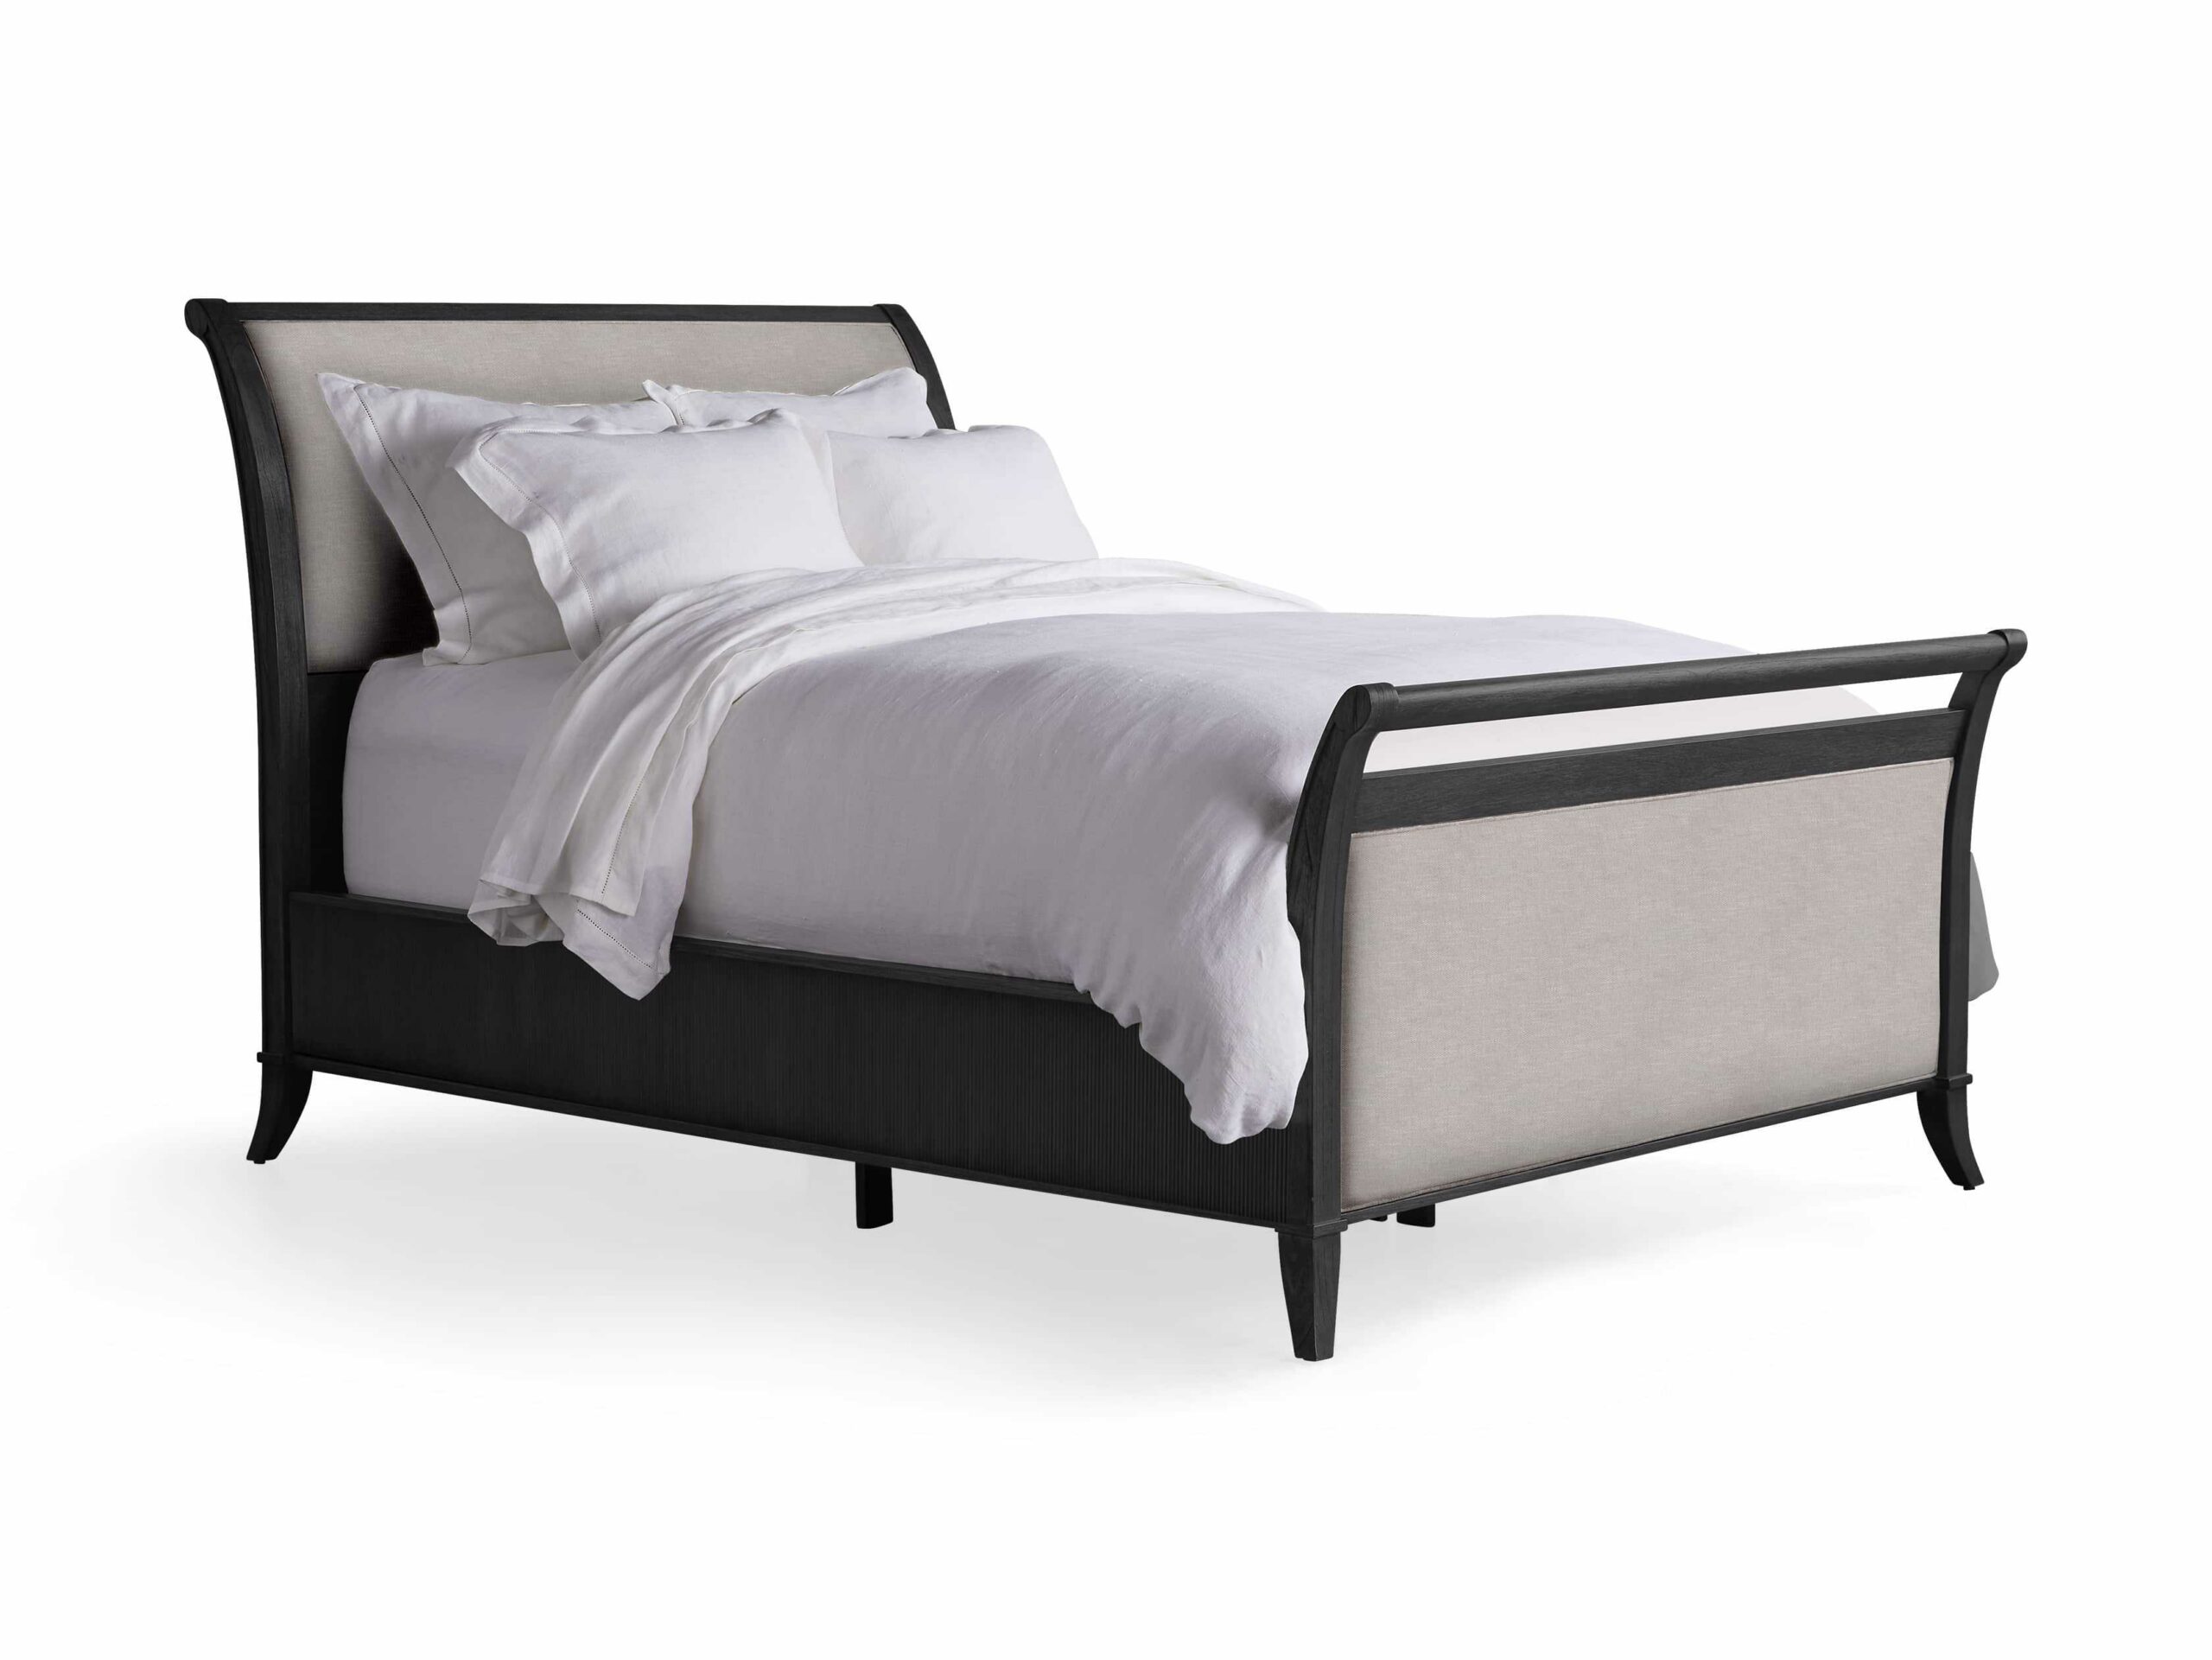 Uncover Timeless Elegance: Classic Italian Bedroom Furniture!